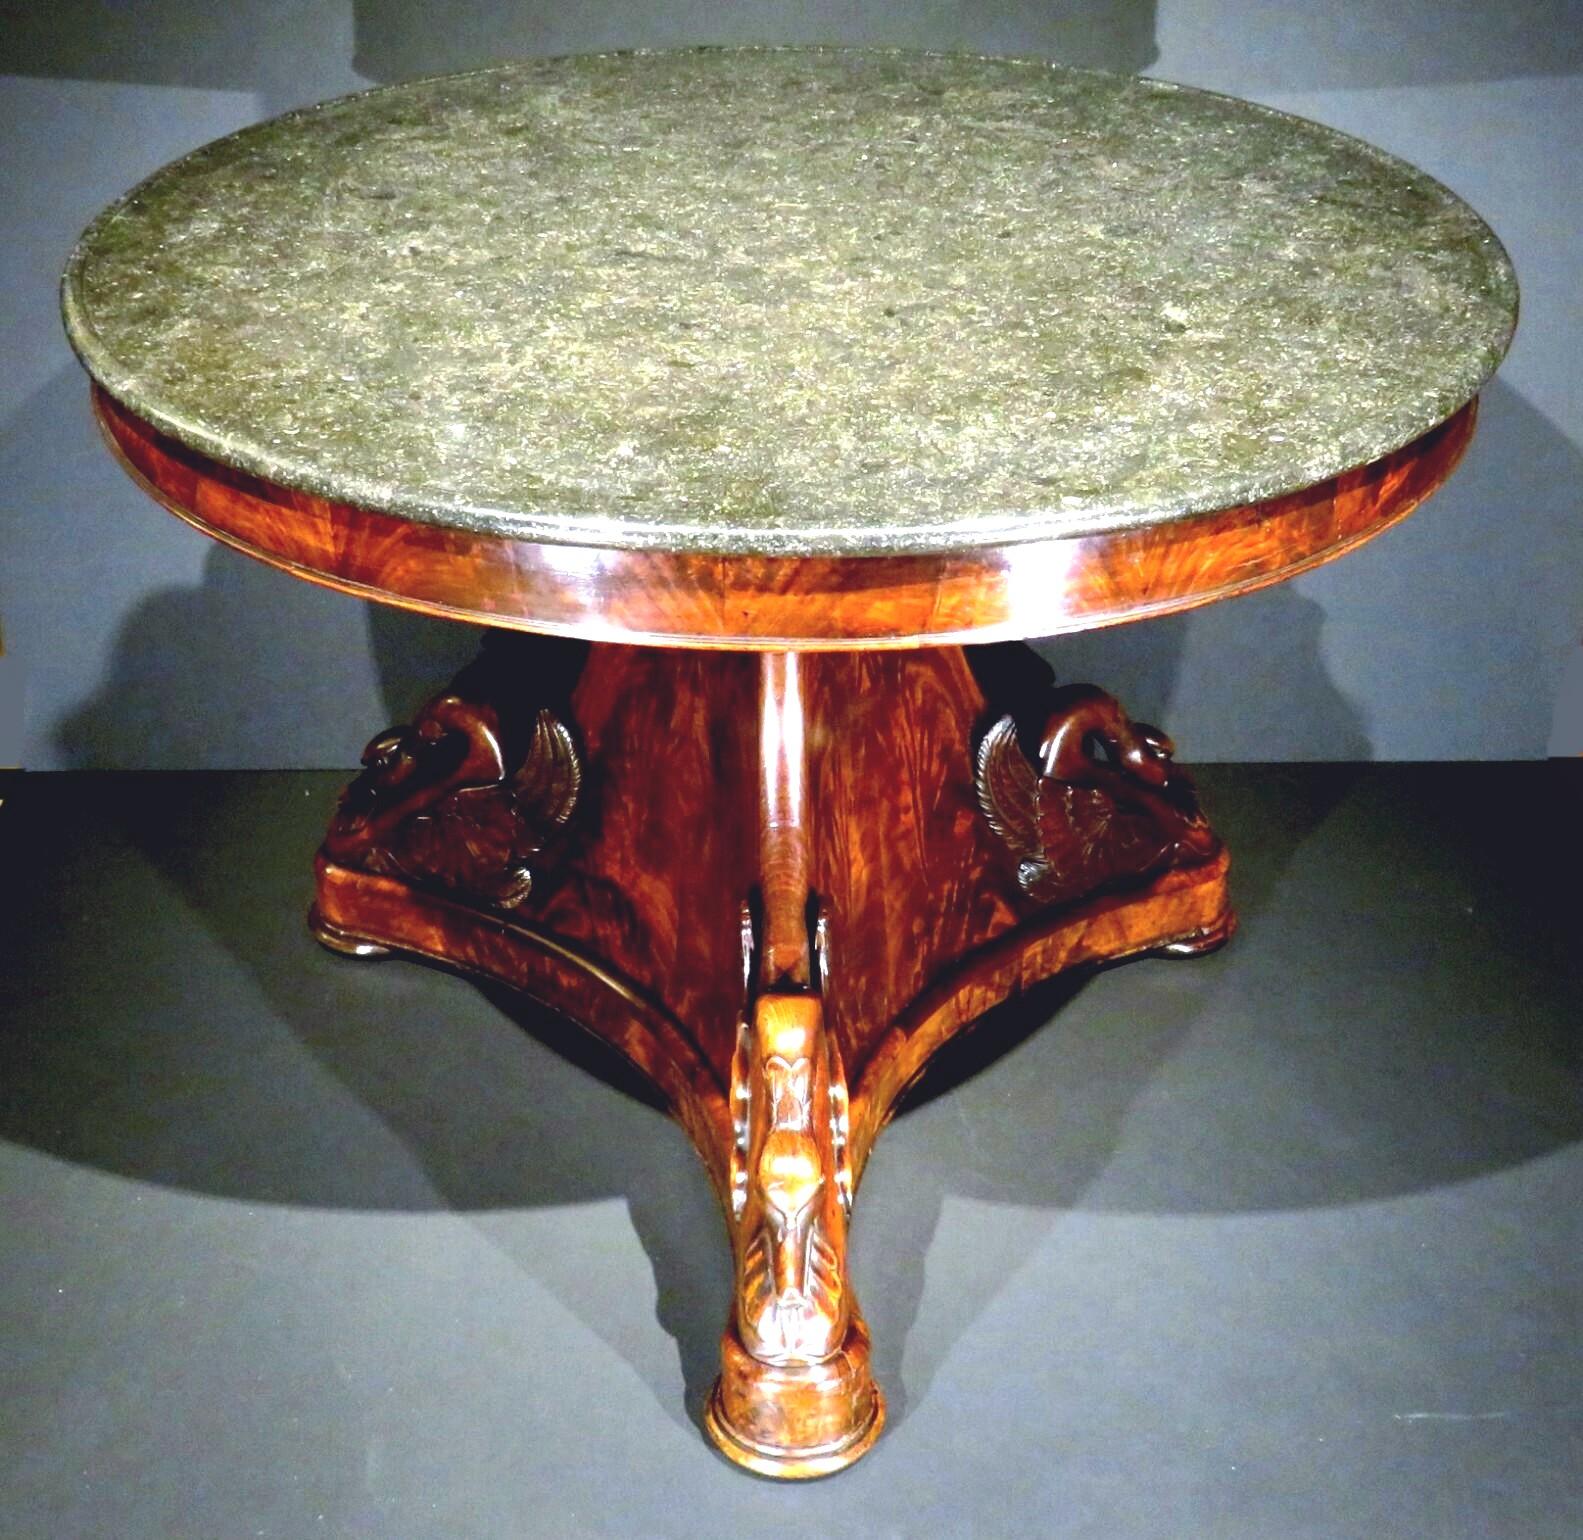 An Exceptional French Empire Period Mahogany Pedestal / Centre Table, Circa 1815 In Good Condition For Sale In Ottawa, Ontario